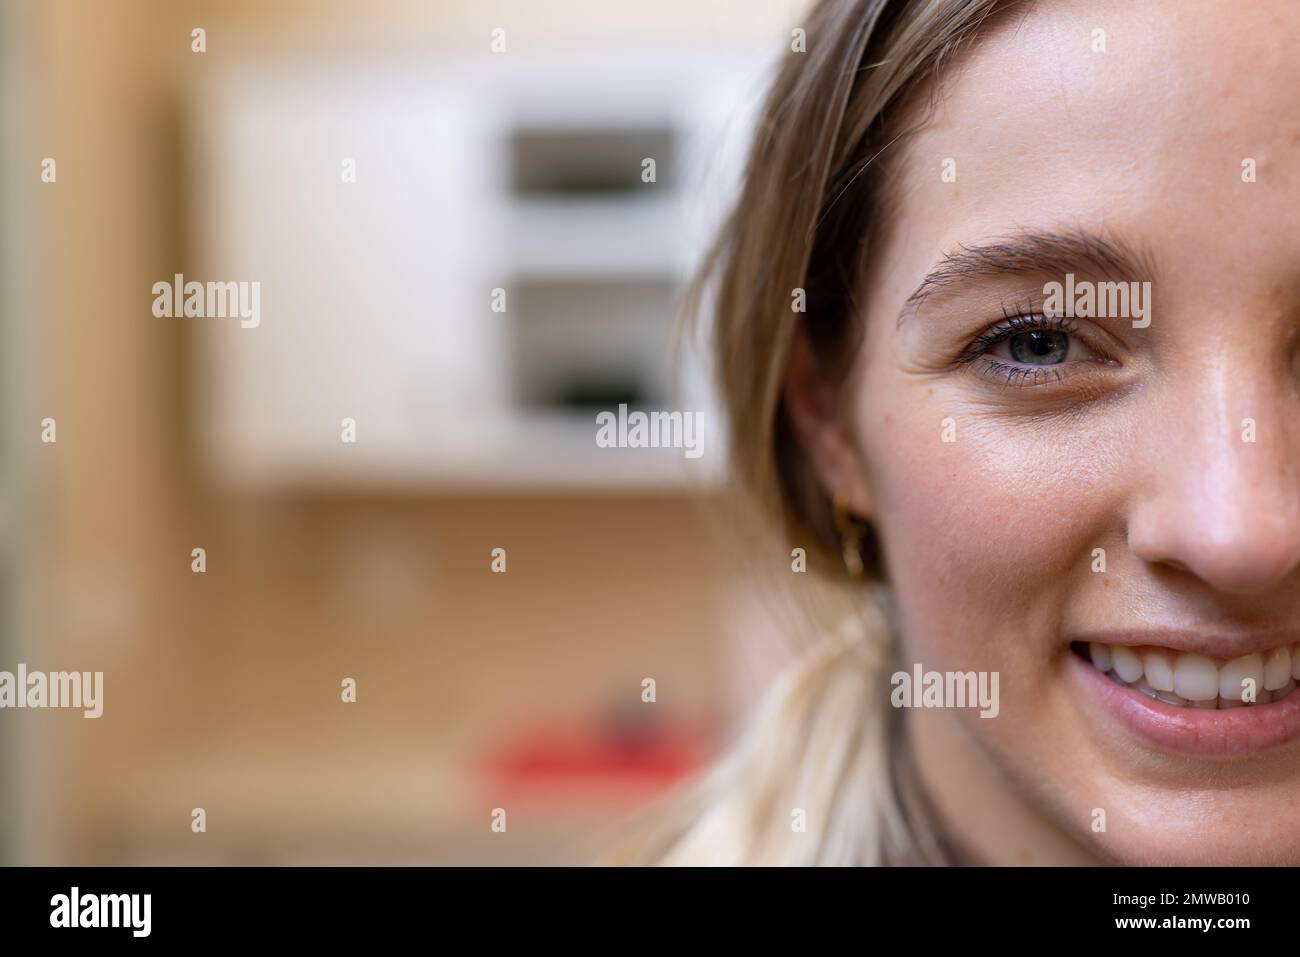 Half face portrait of smiling blonde caucasian woman in kitchen at home, copy space Stock Photo